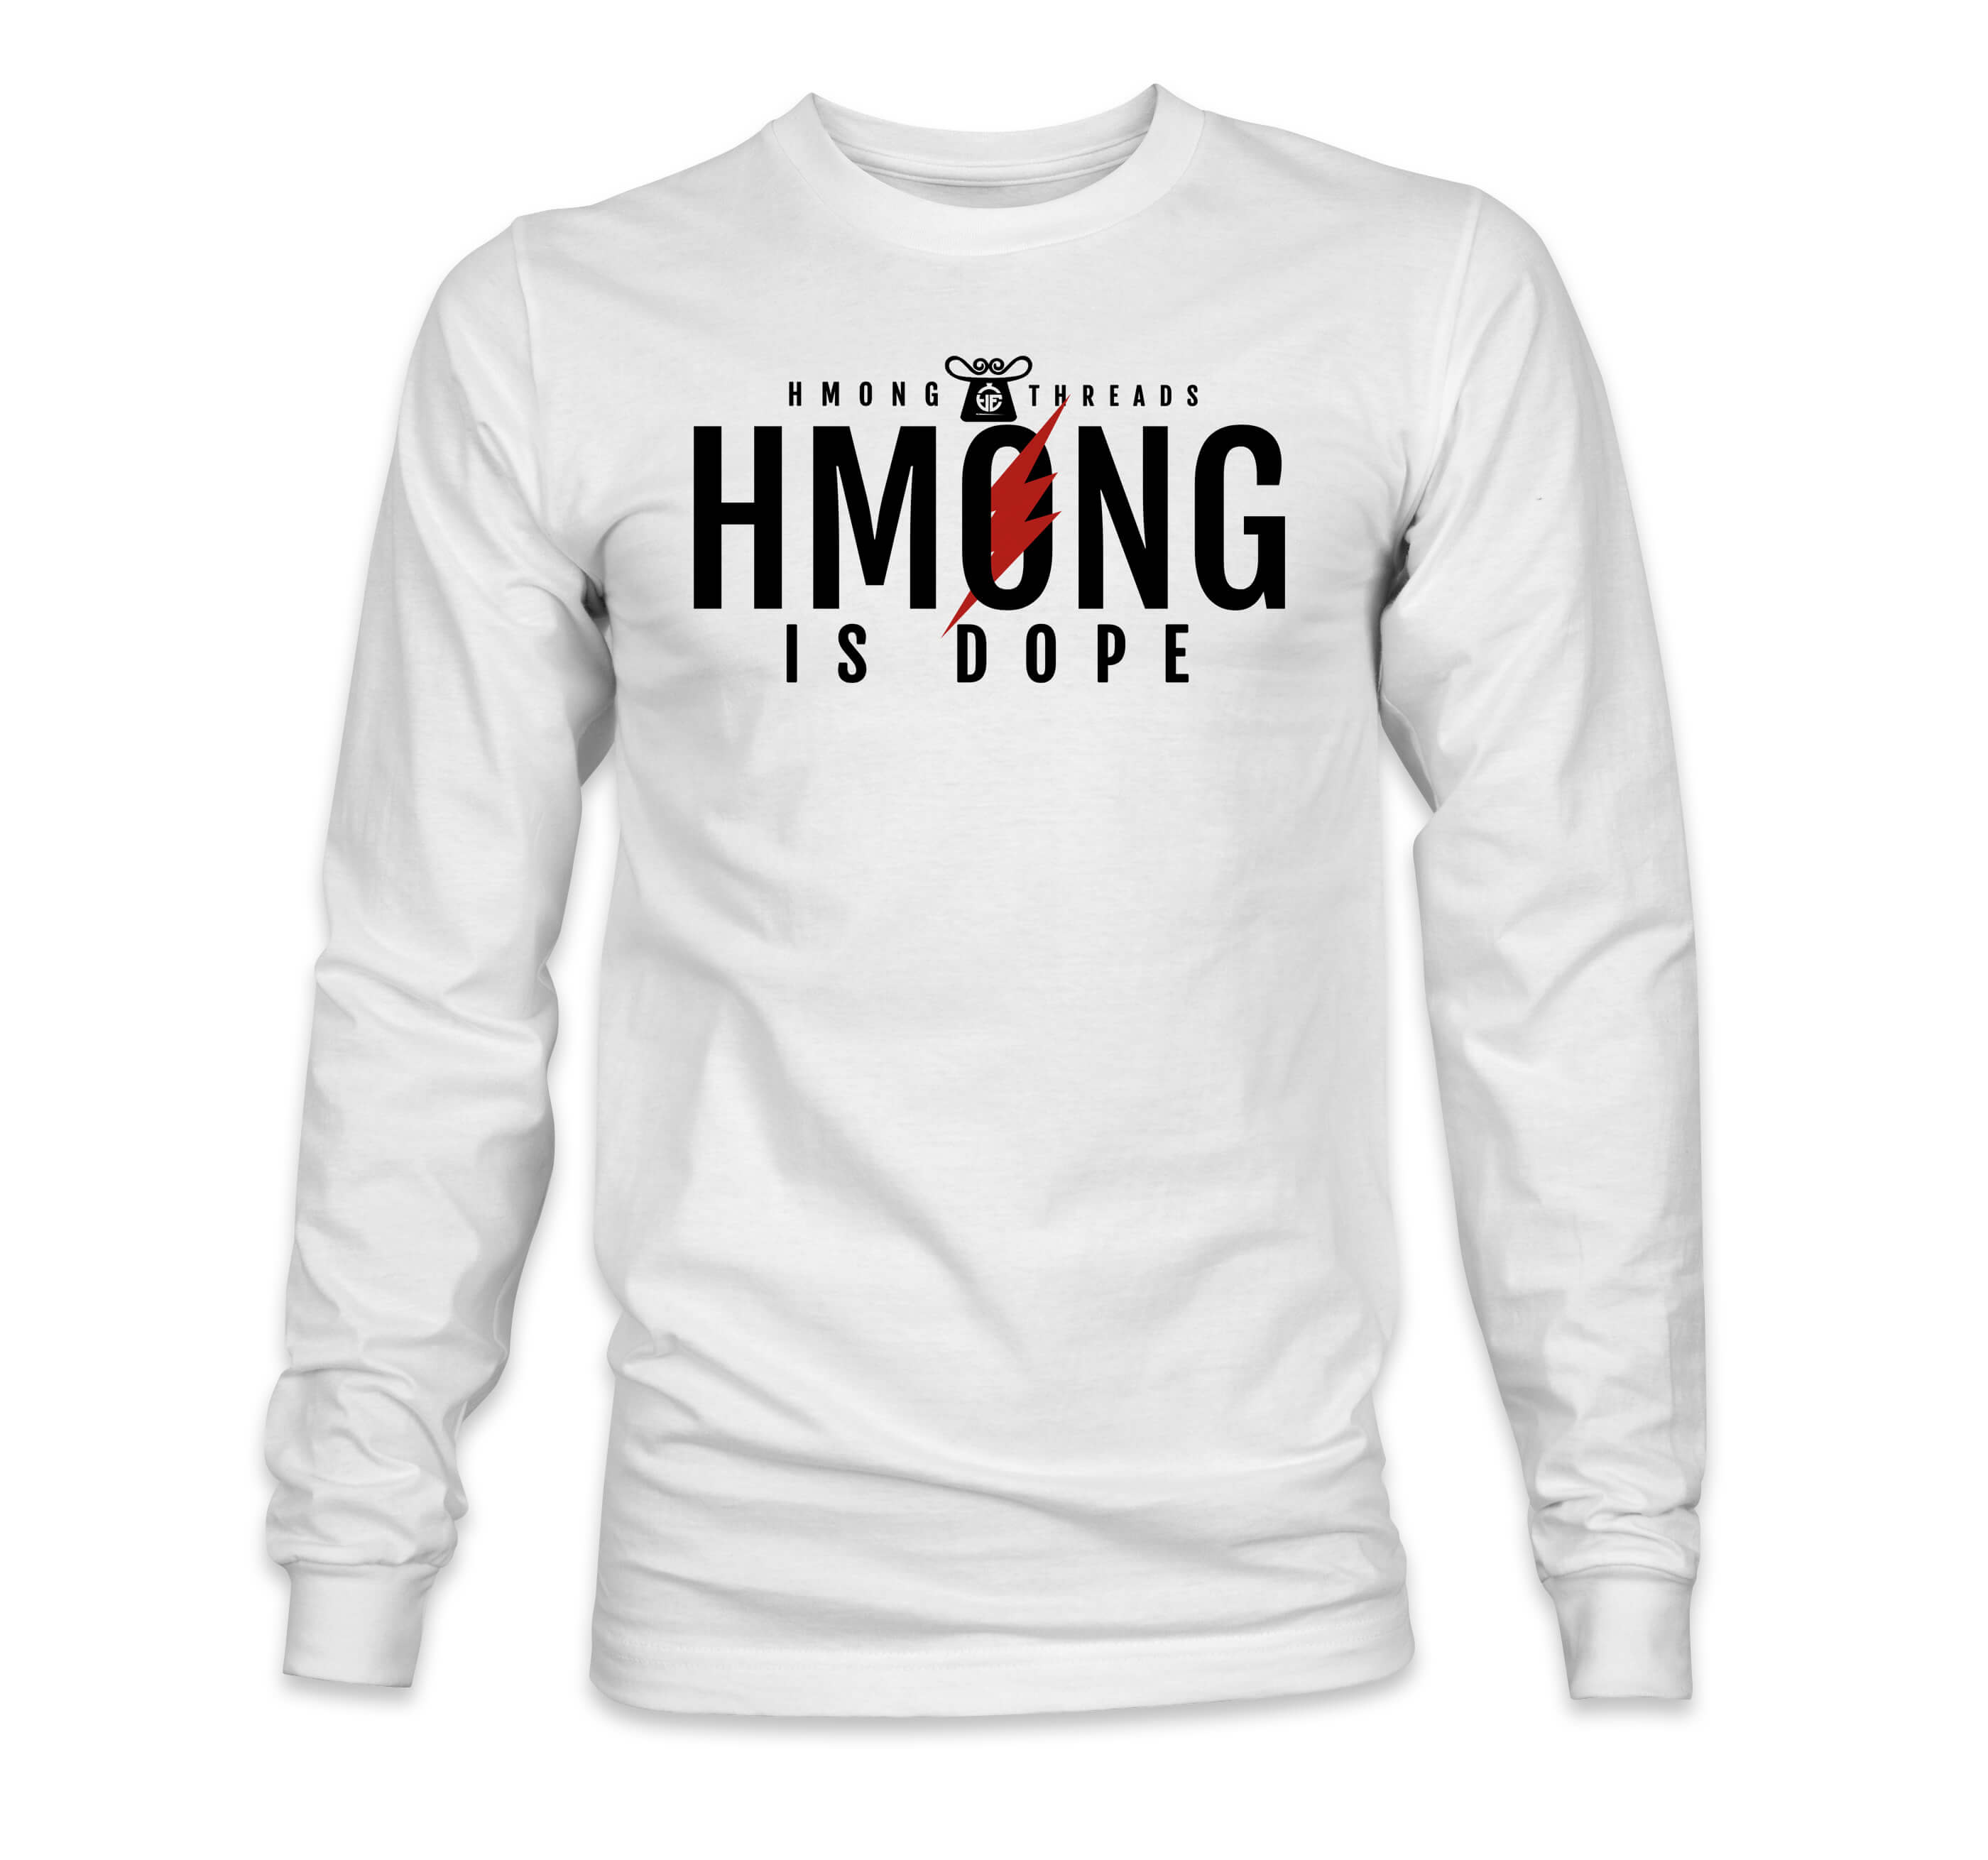 Hmong Is Dope Long Sleeves T-shirt – White